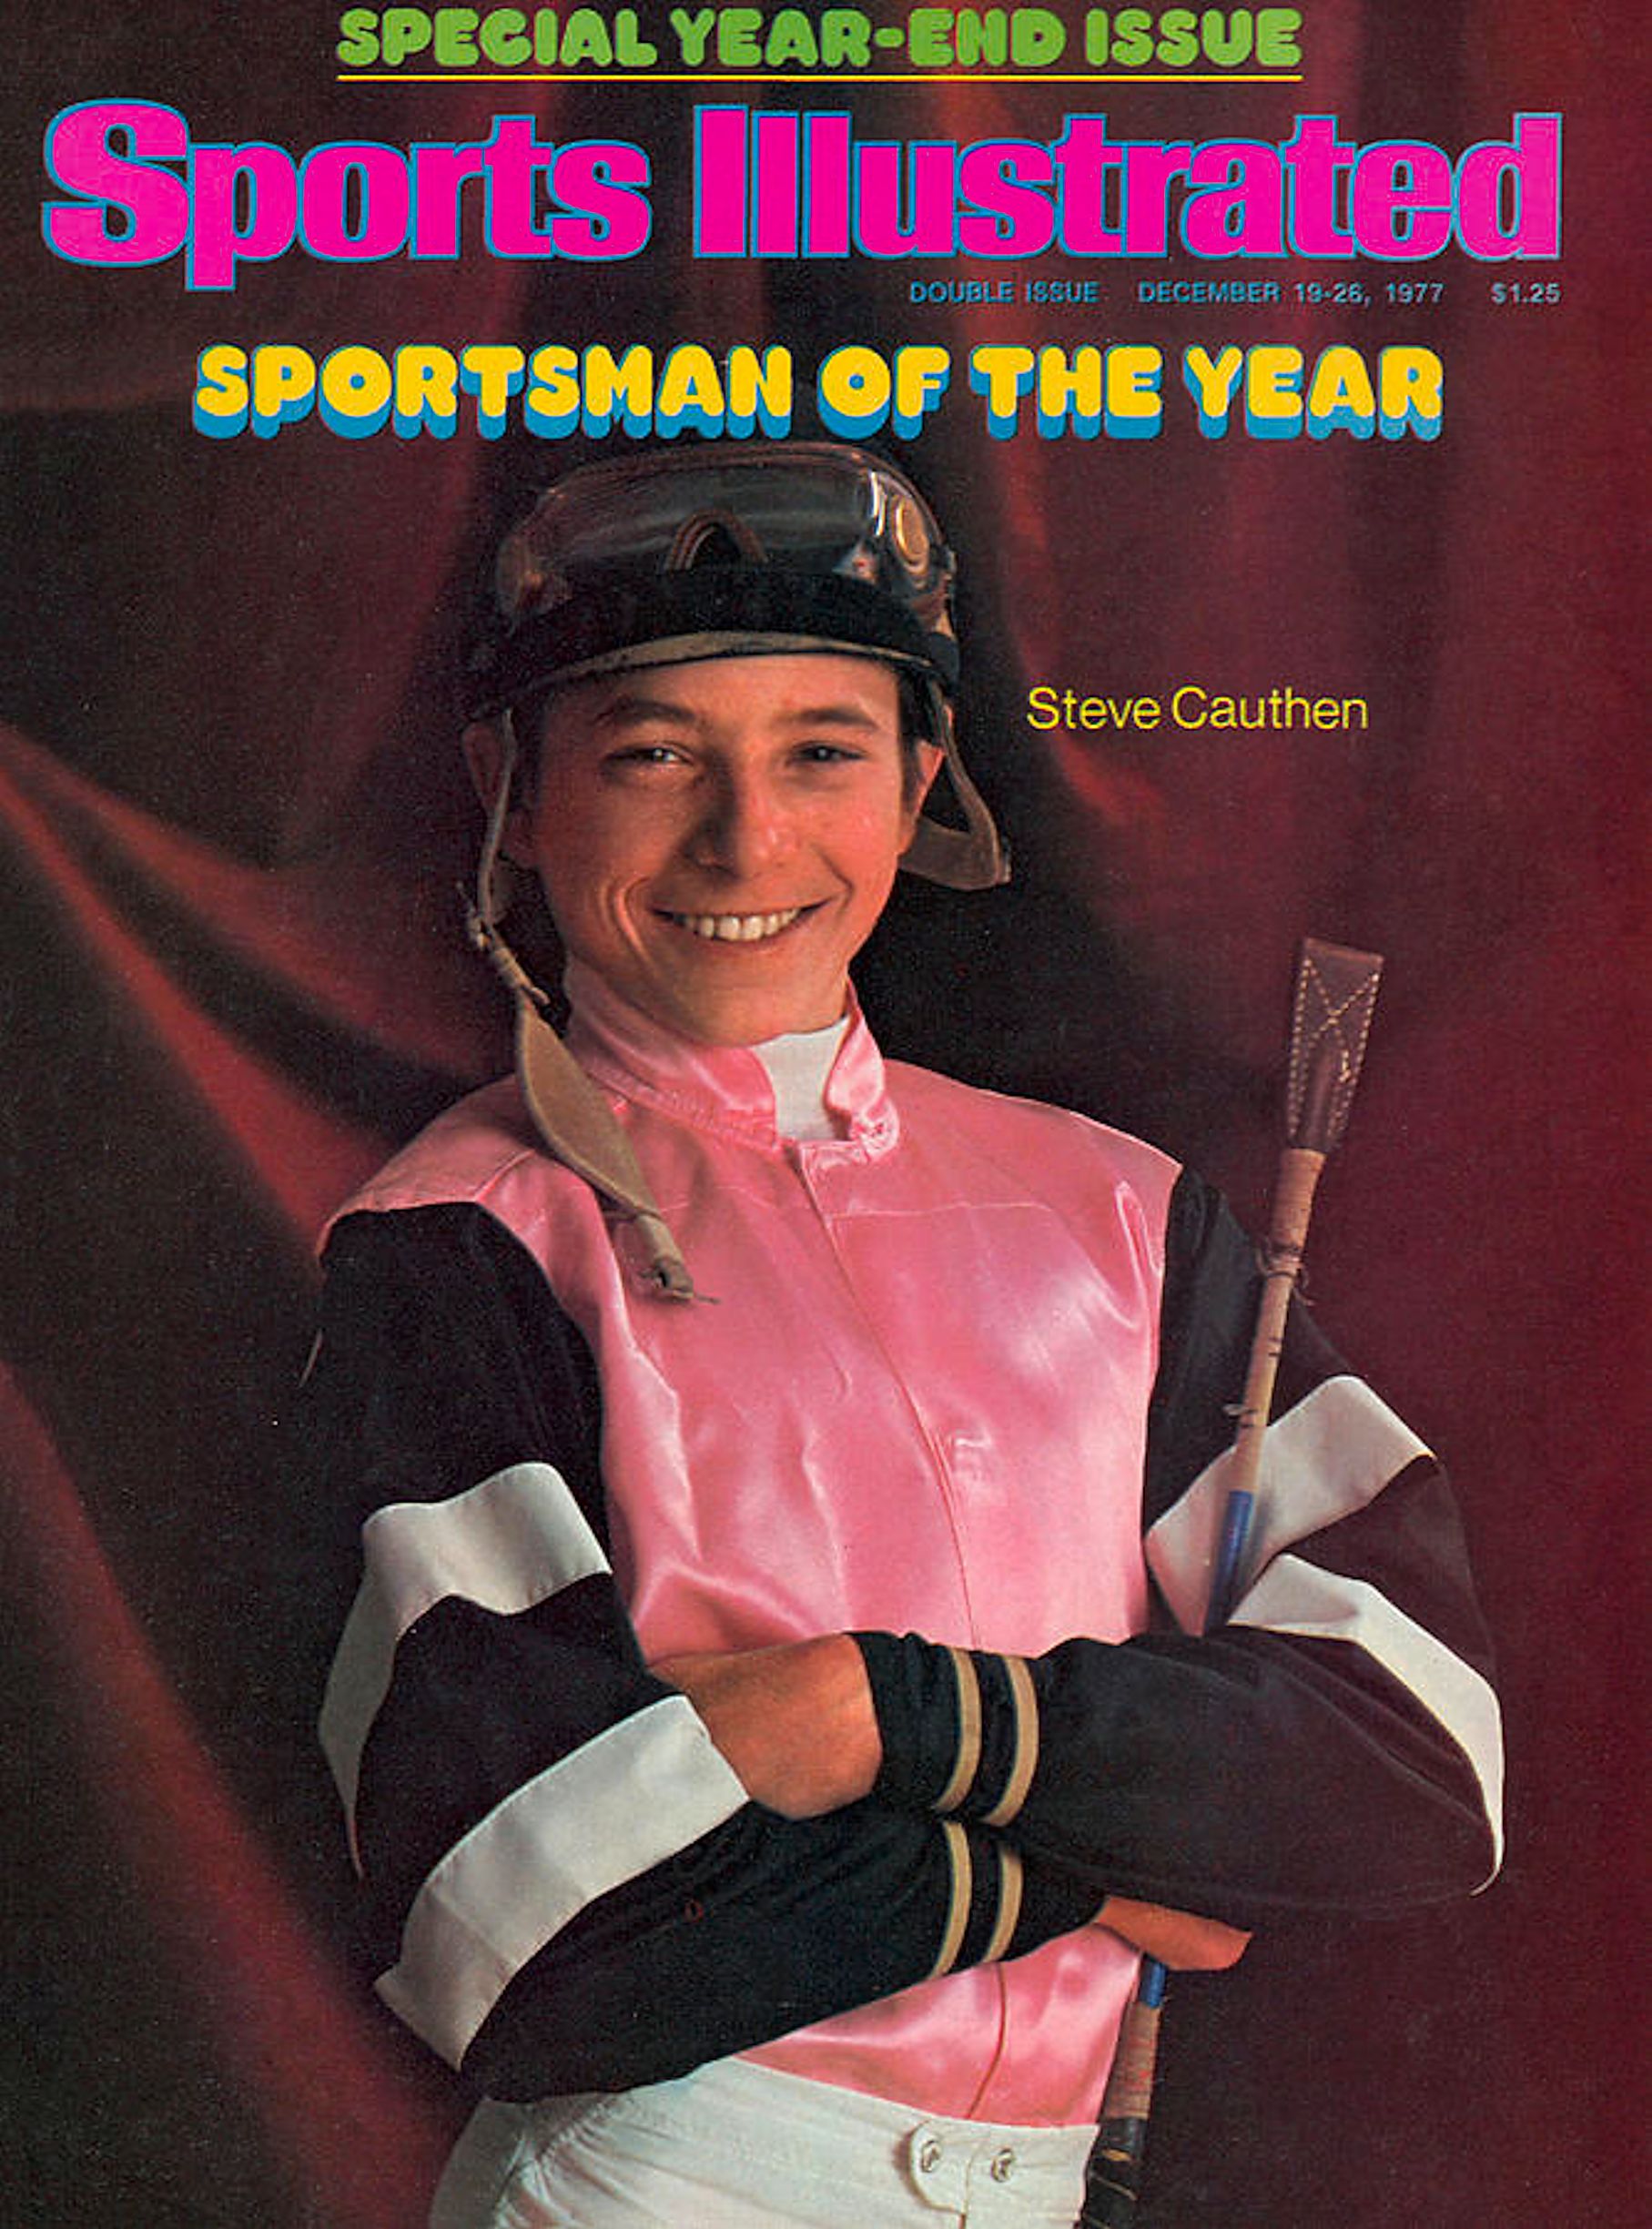 Steve Cauthen on the cover of "Sports Illustrated" in 1977 (Sports Illustrated)